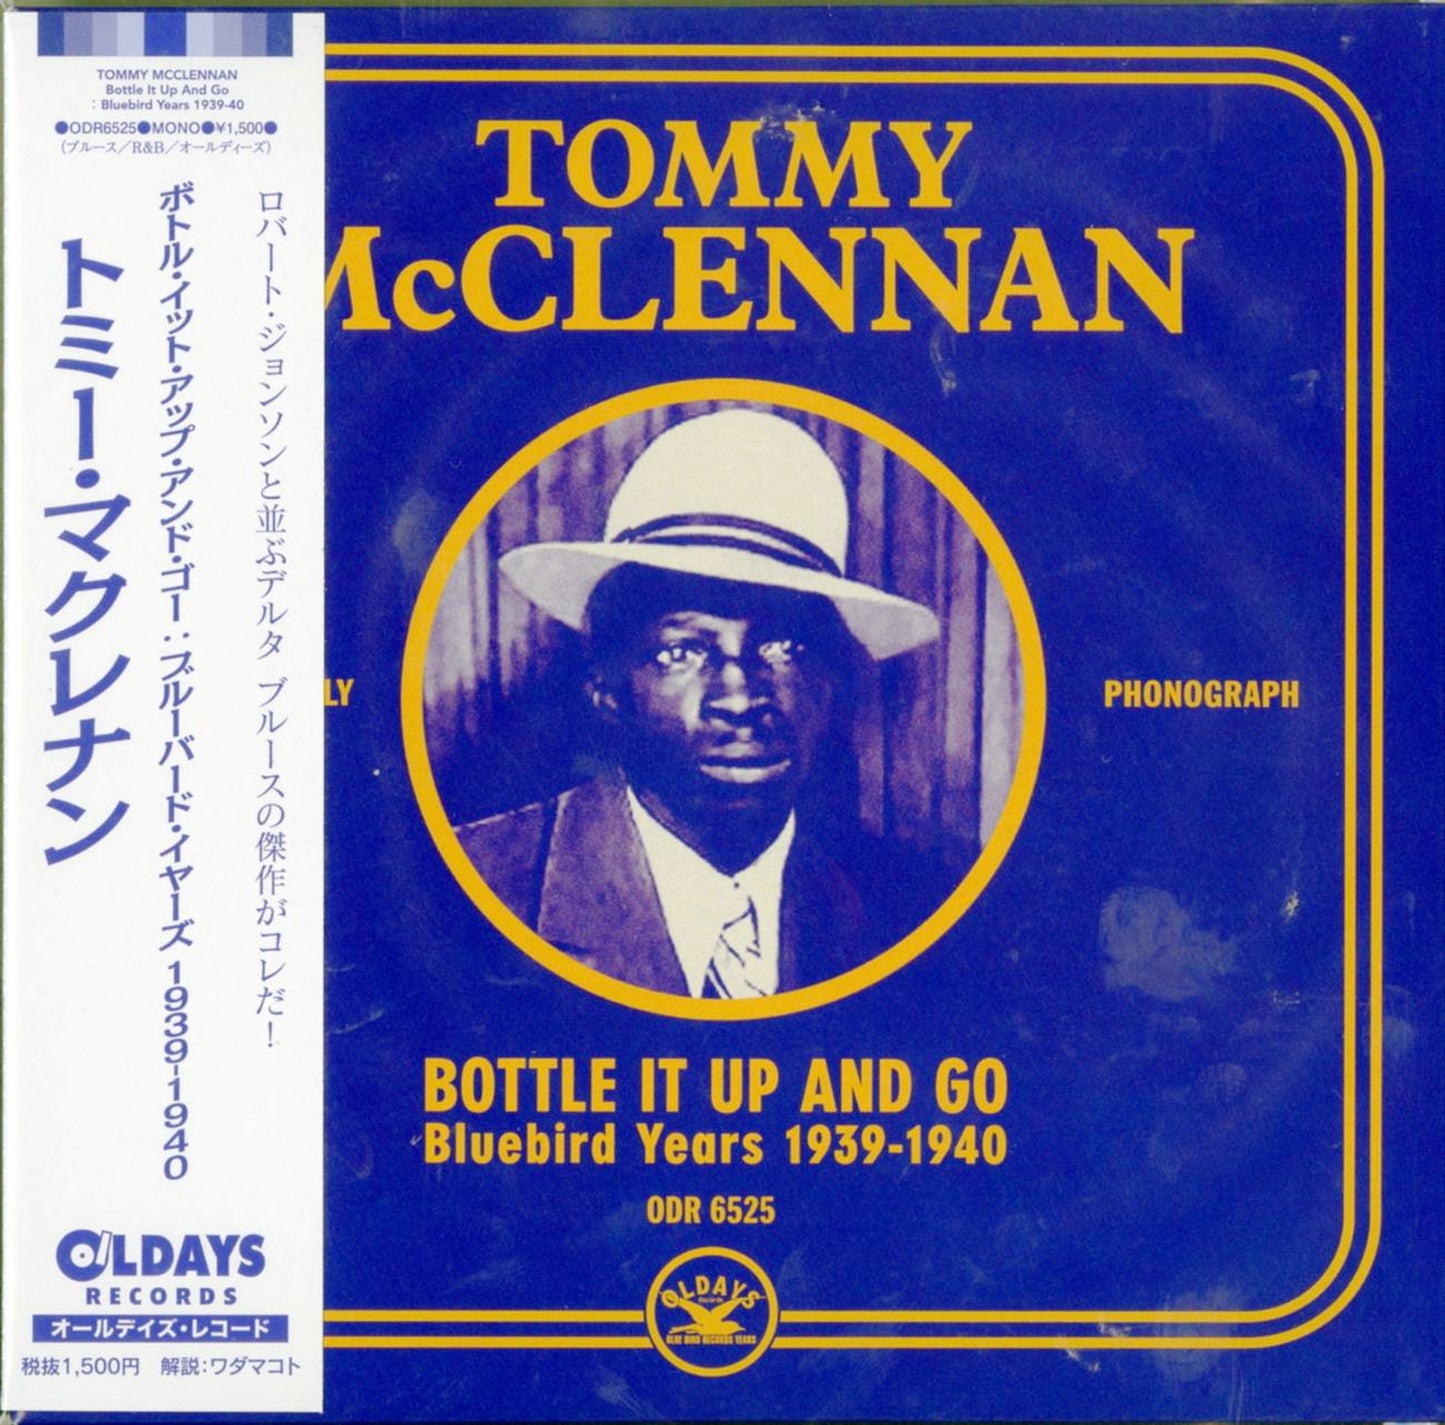 Tommy Mcclennan - Bottle It Up And Go: Bluebird Years 1939-40 - Japan  Mini LP CD